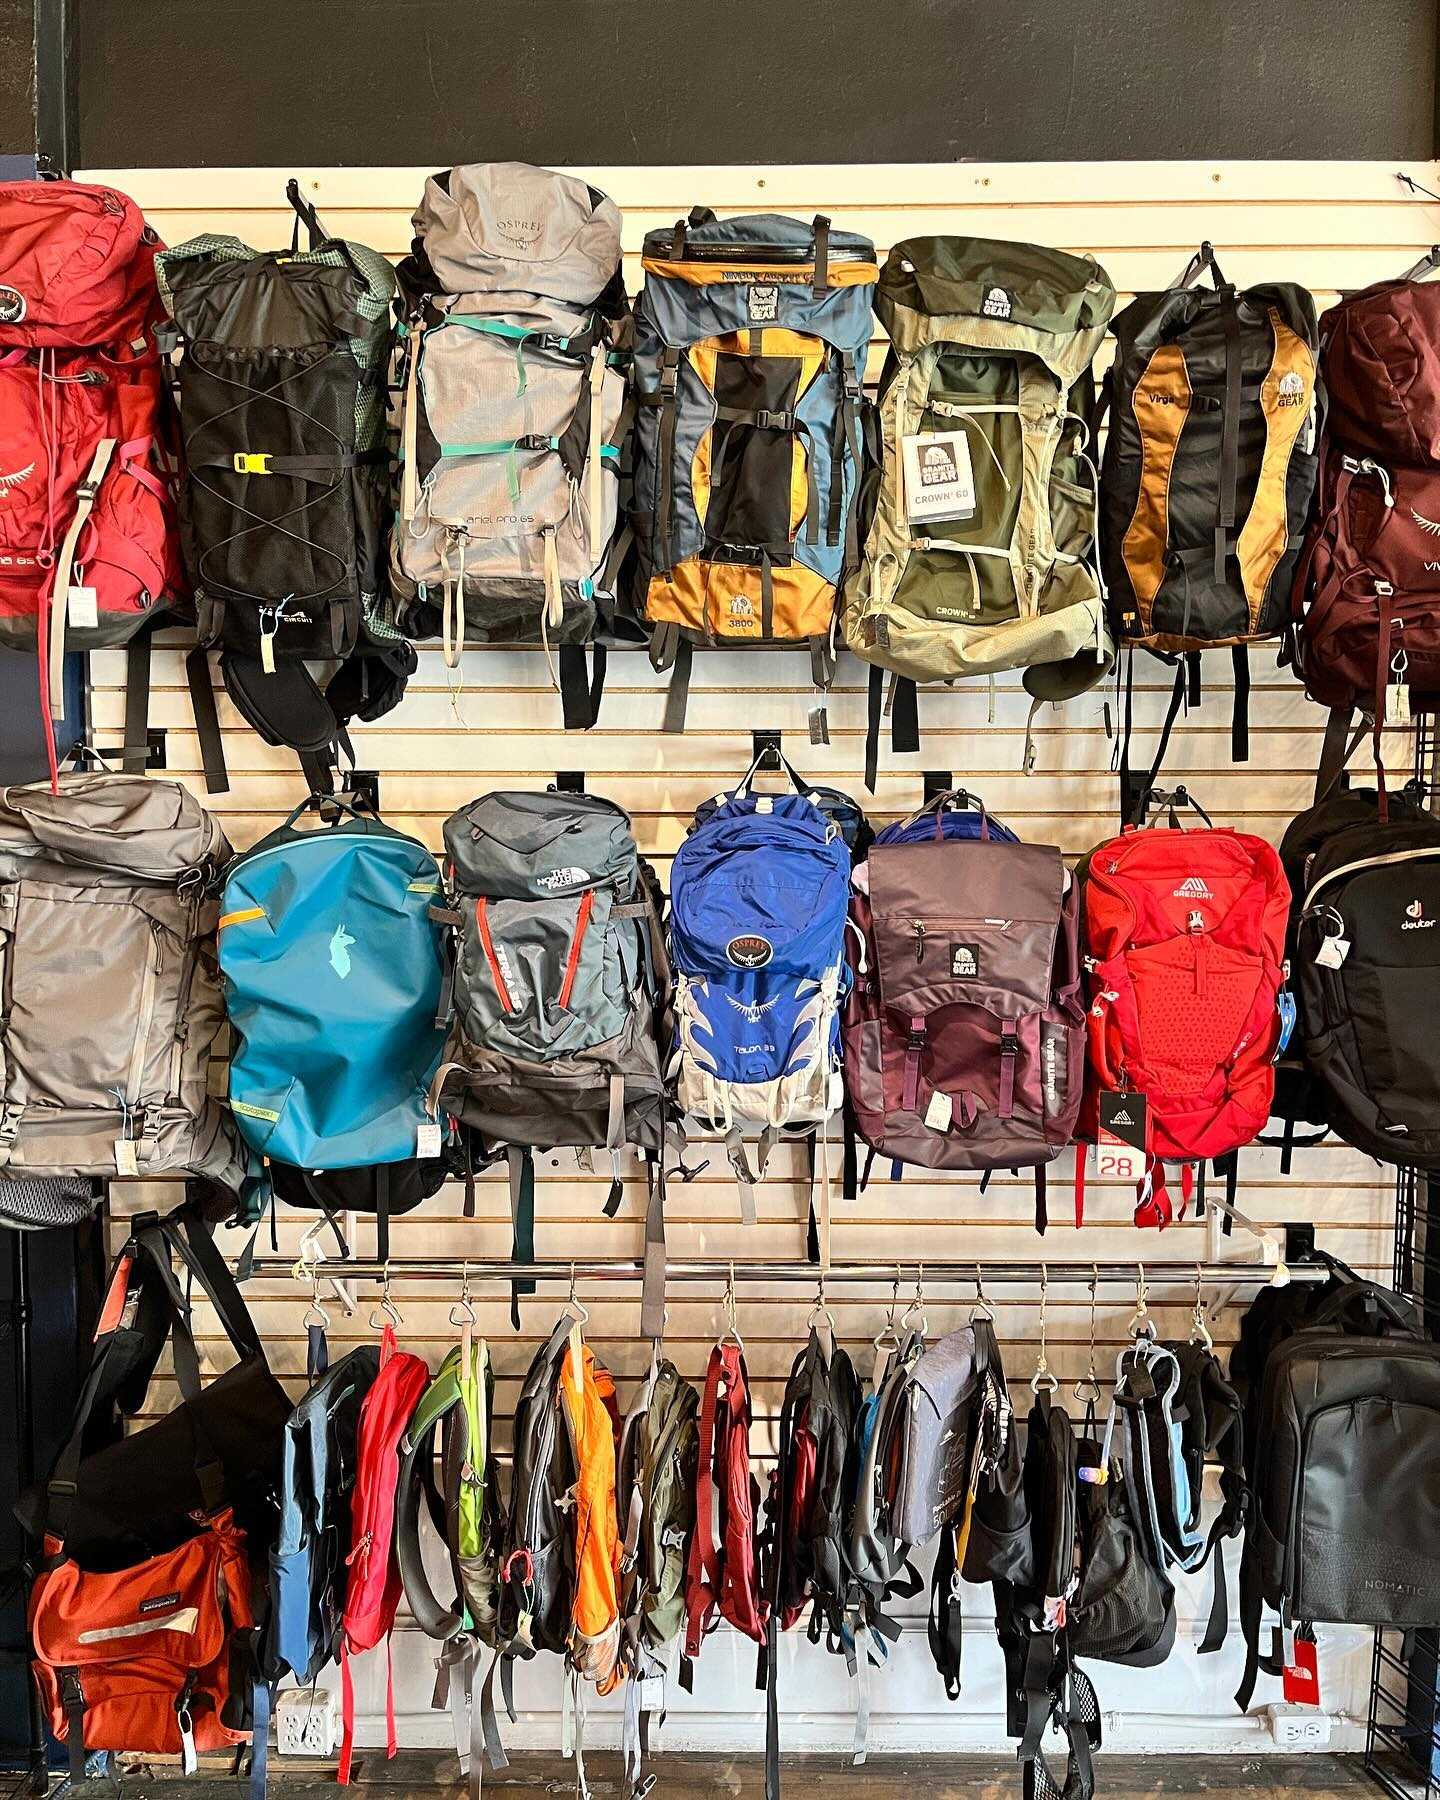 ✅ Backpacks of all sizes.
✅ Hats: trucker, 5-panel, brimmed and bucket.
✅ Climbing shoes & chalk bags
-
The shop is full of great finds in our seasonal 
re-opening week. Hope to see you this weekend!